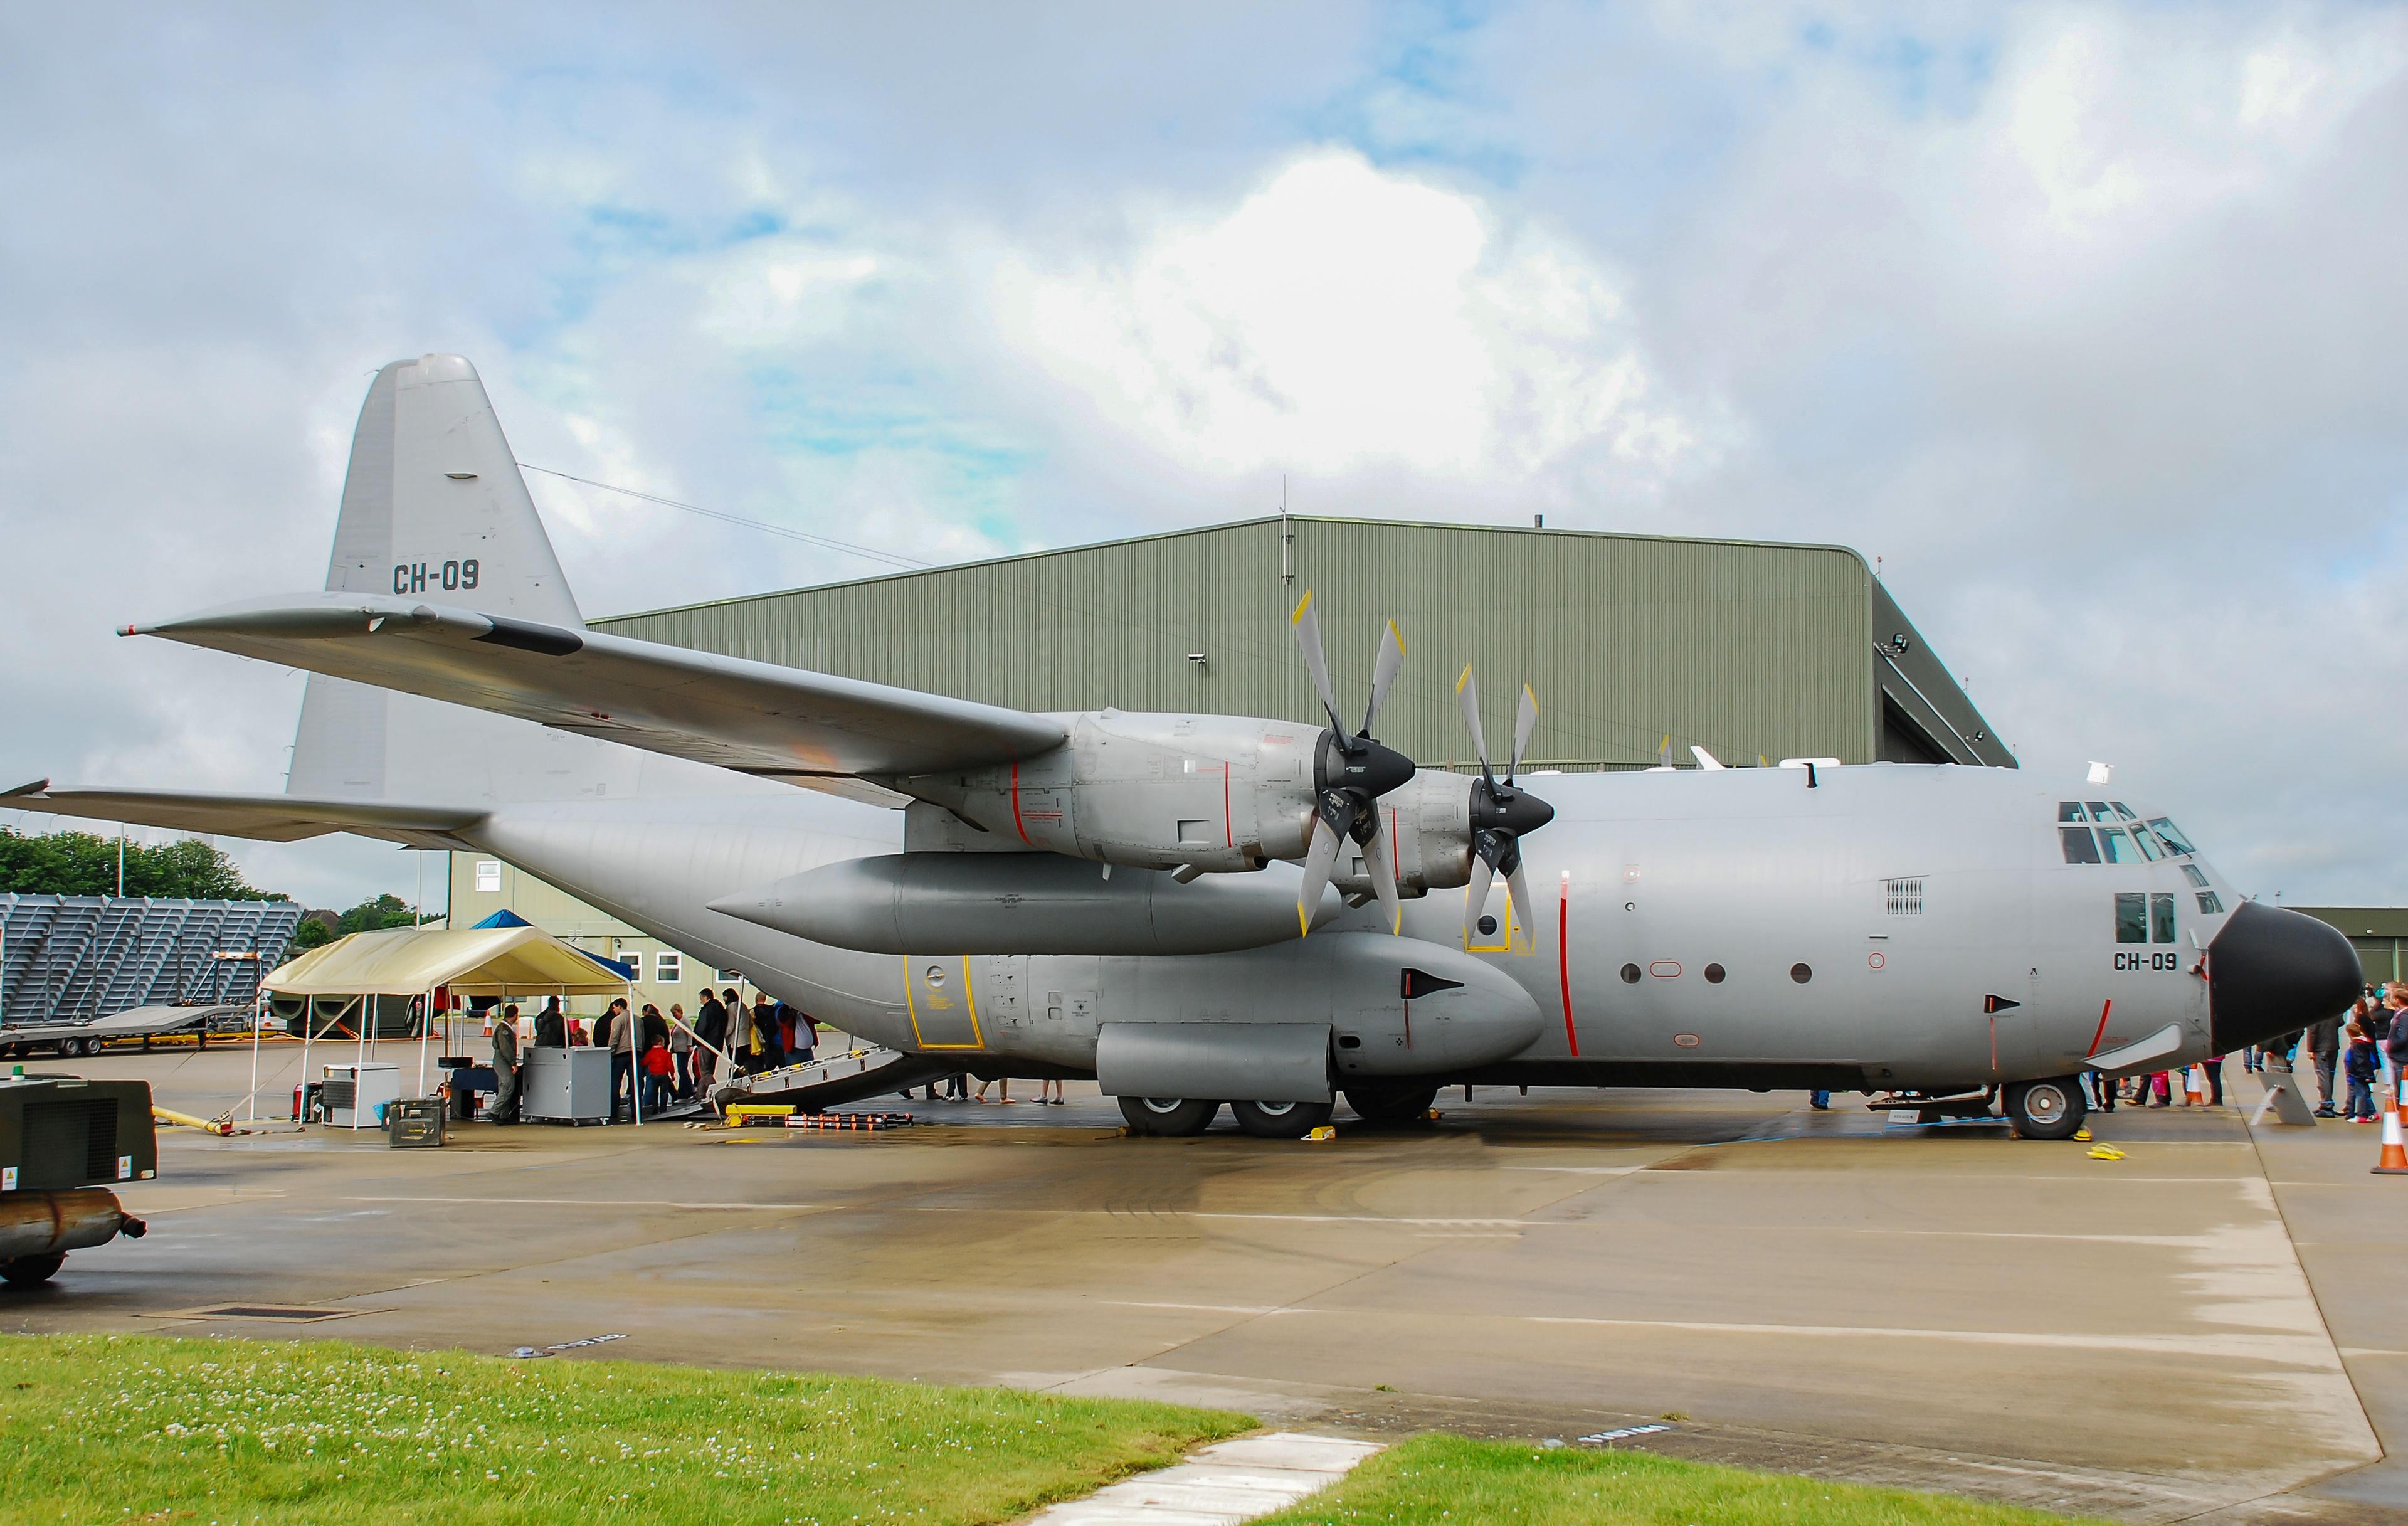 CH-09/CH09 Withdrawn from use Lockheed C-130 Hercules Airframe Information - AVSpotters.com